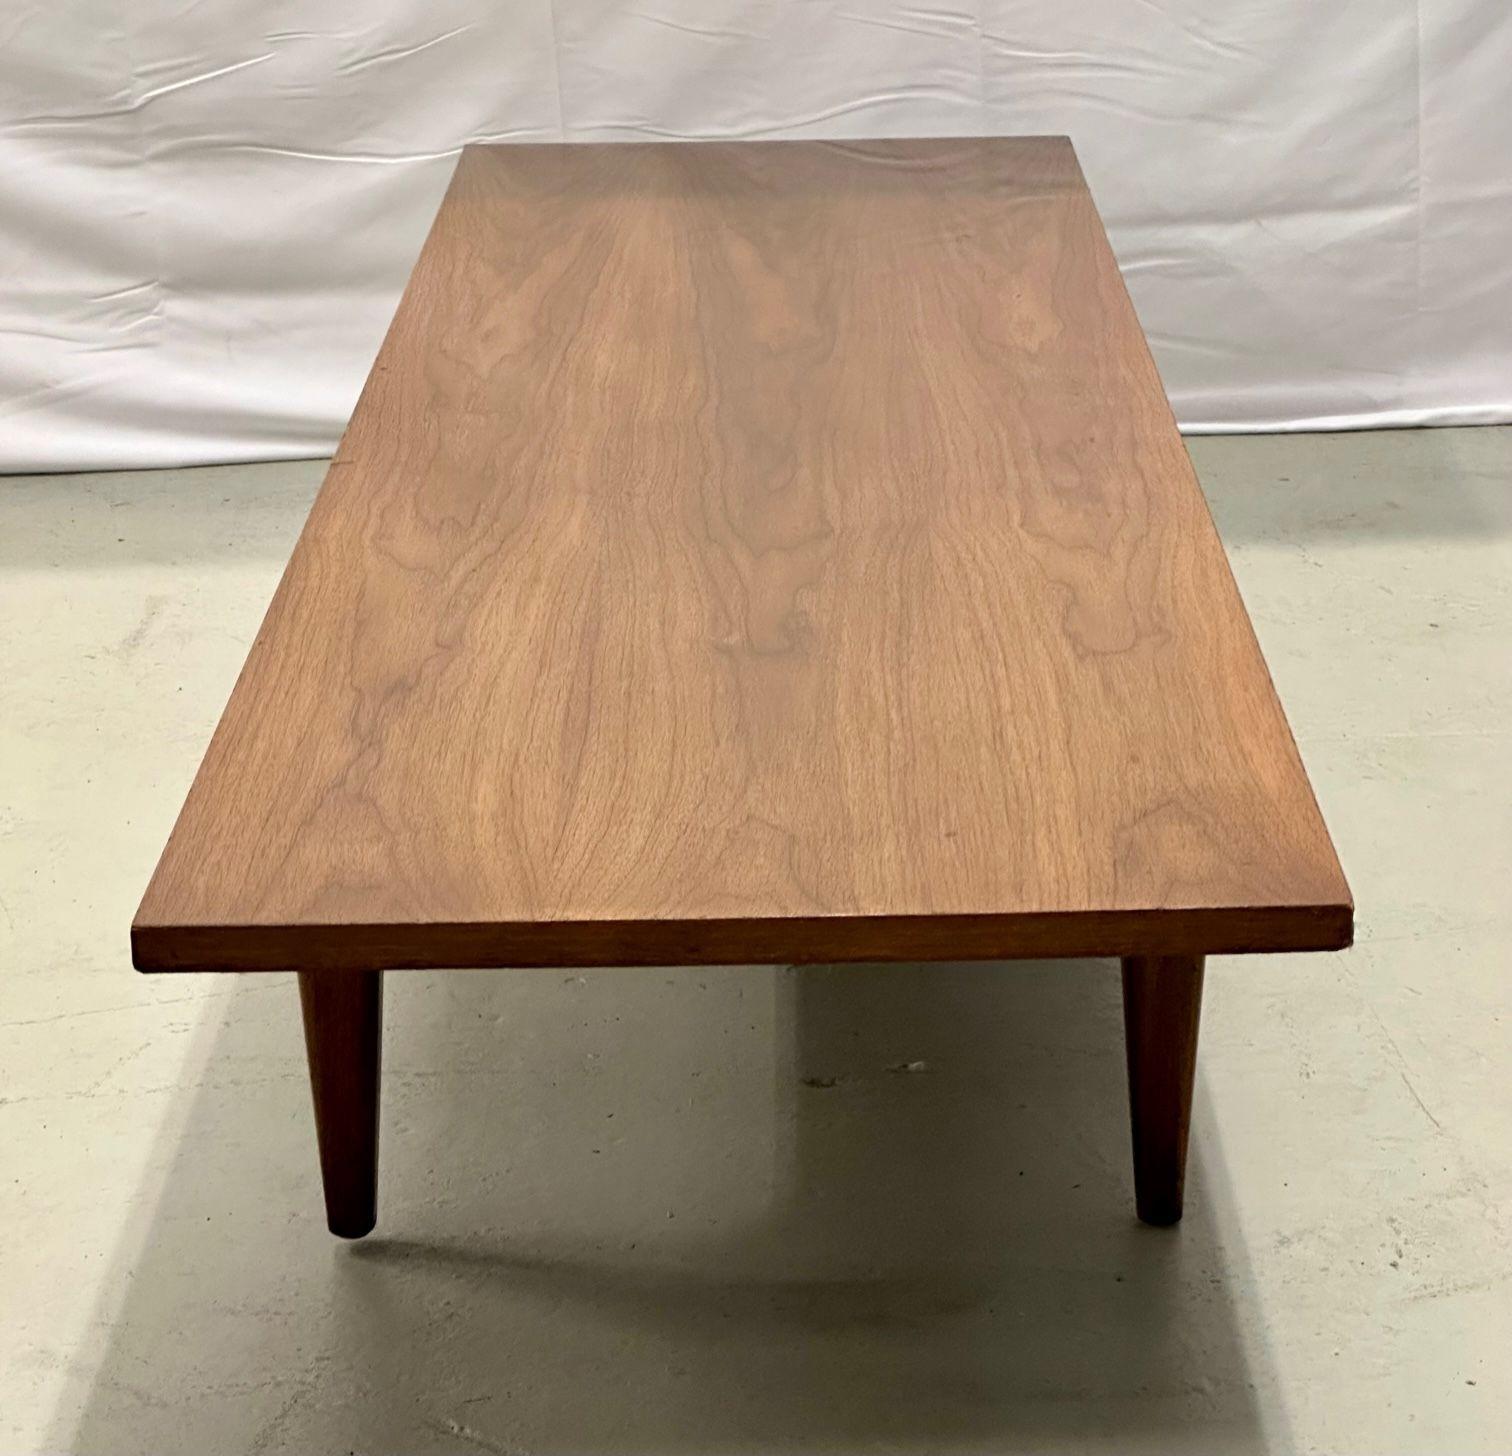 Danish Mid-Century Modern Cocktail or Coffee Table, 1950s, Solid Teak For Sale 6